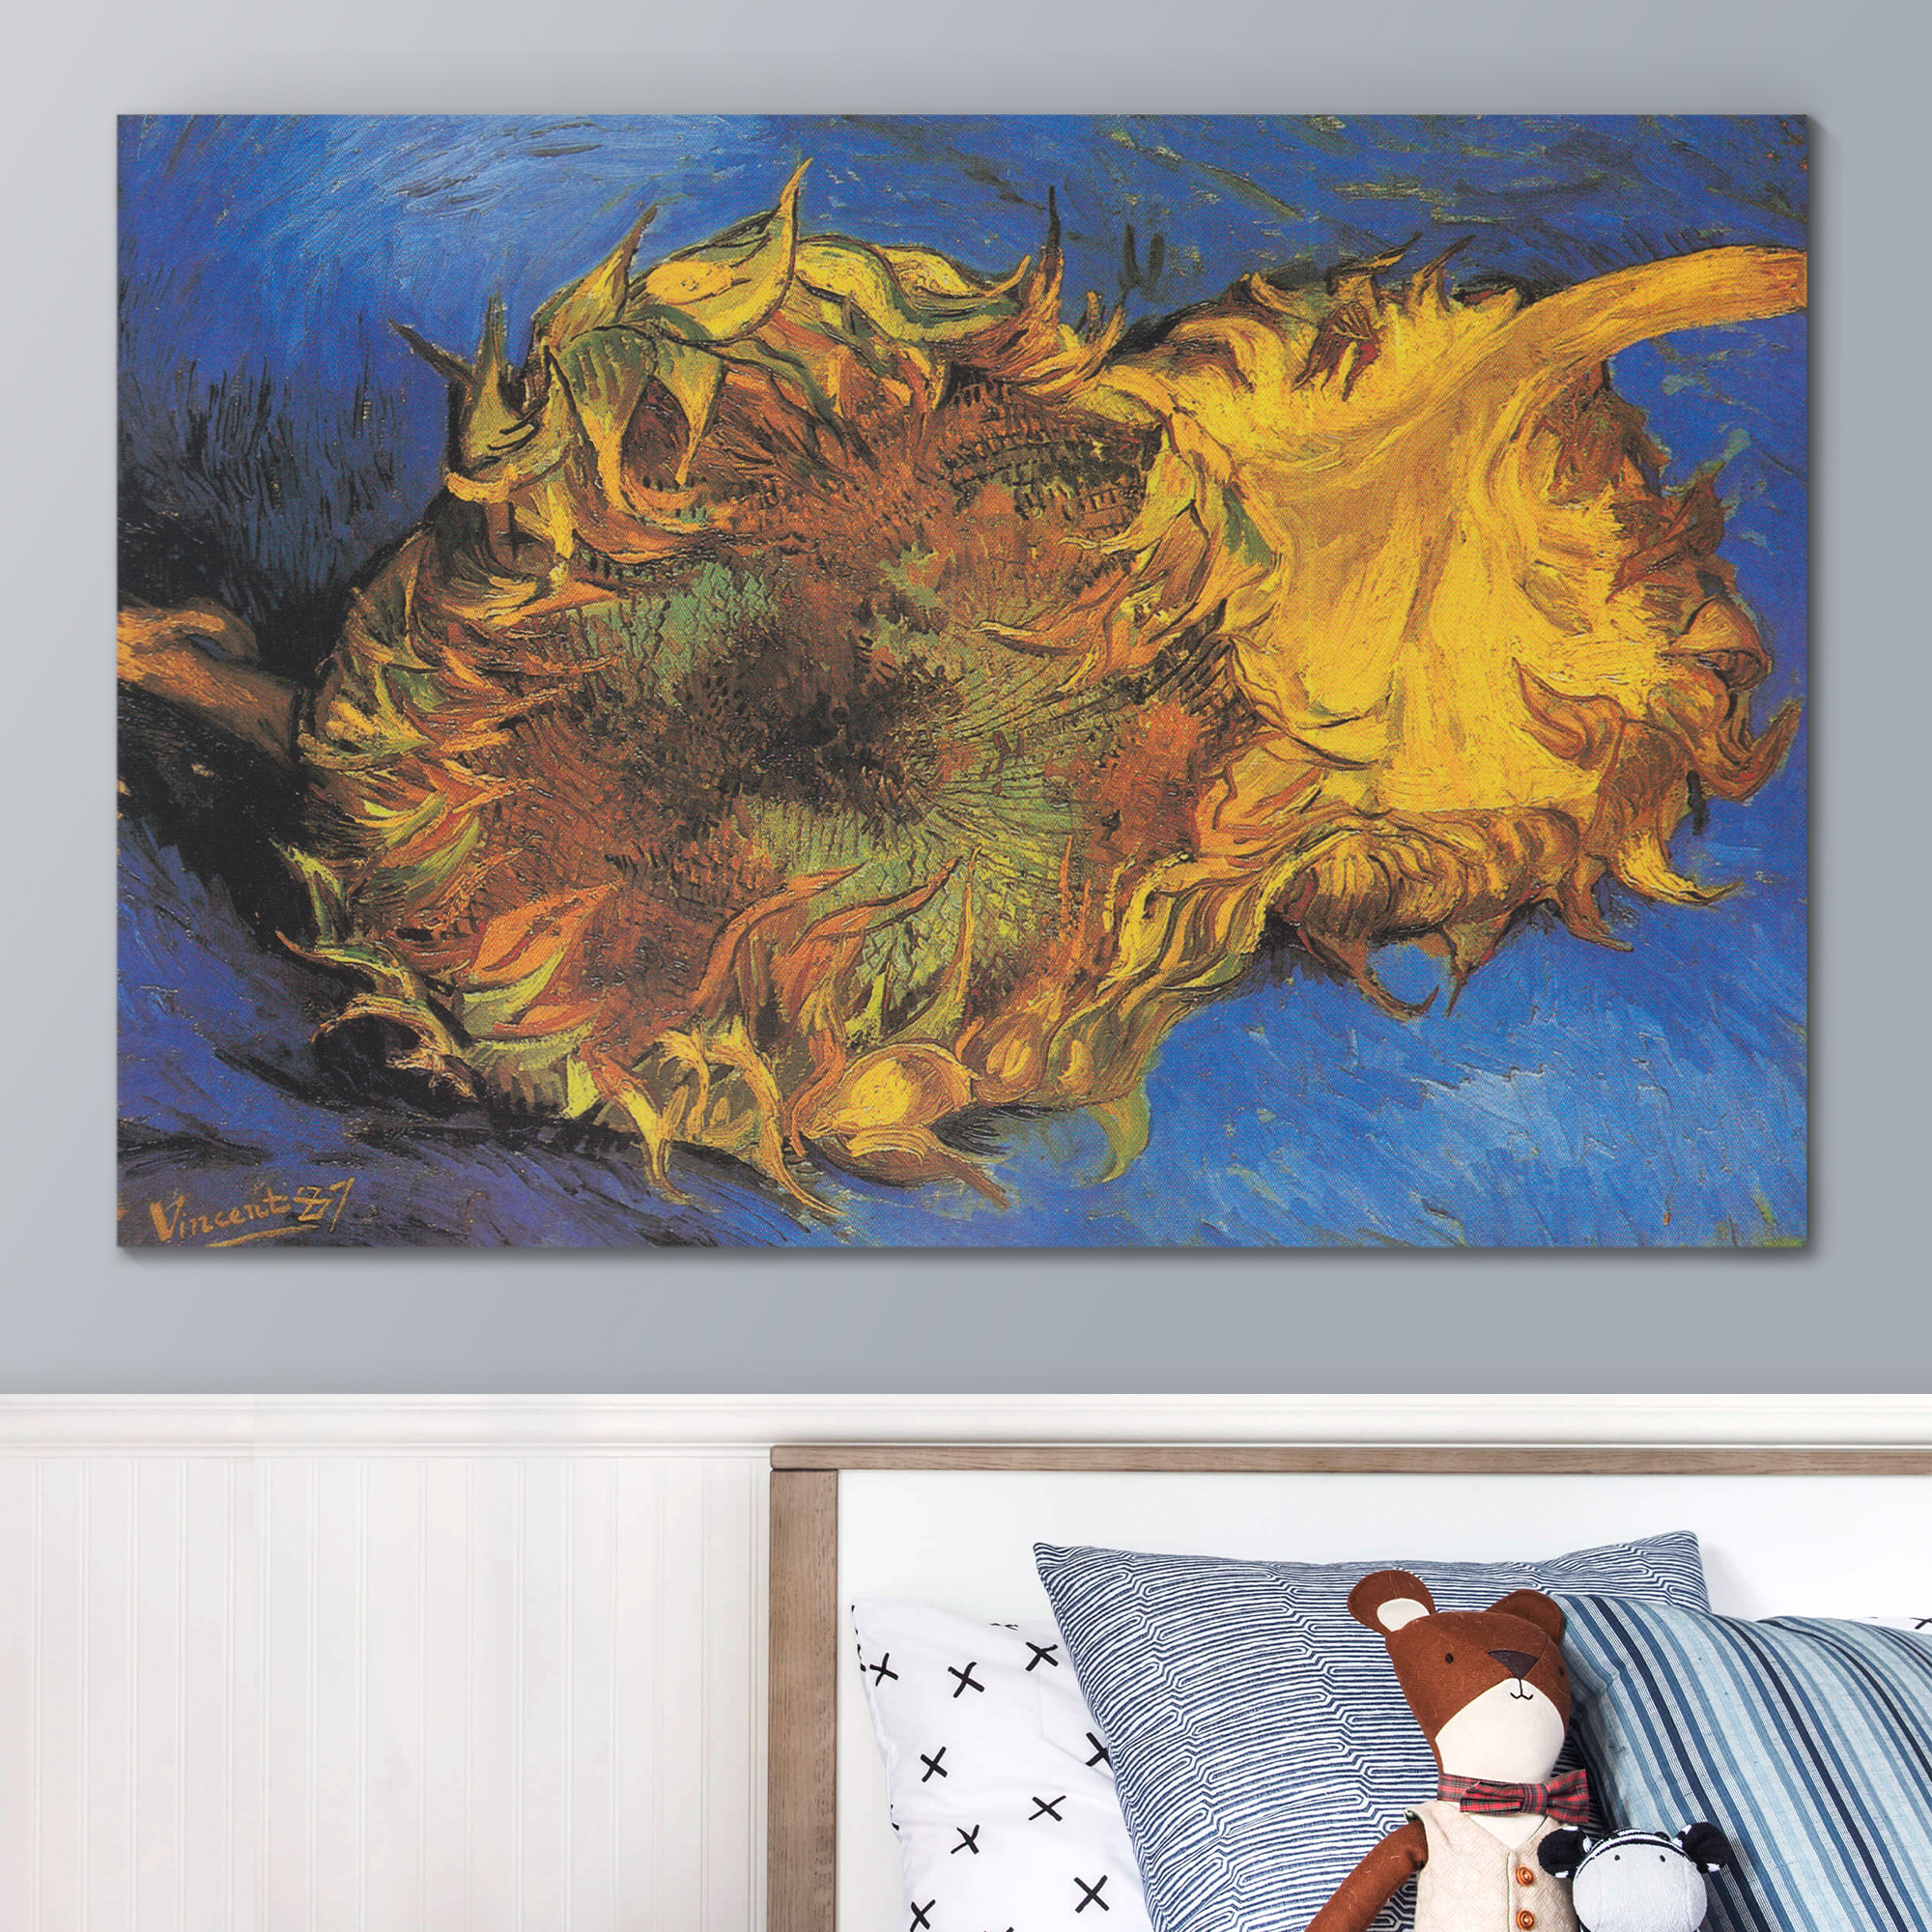 Two Cut Sunflowers, 1887 by Vincent Van Gogh - Canvas Print Wall Art Famous Painting Reproduction - 16